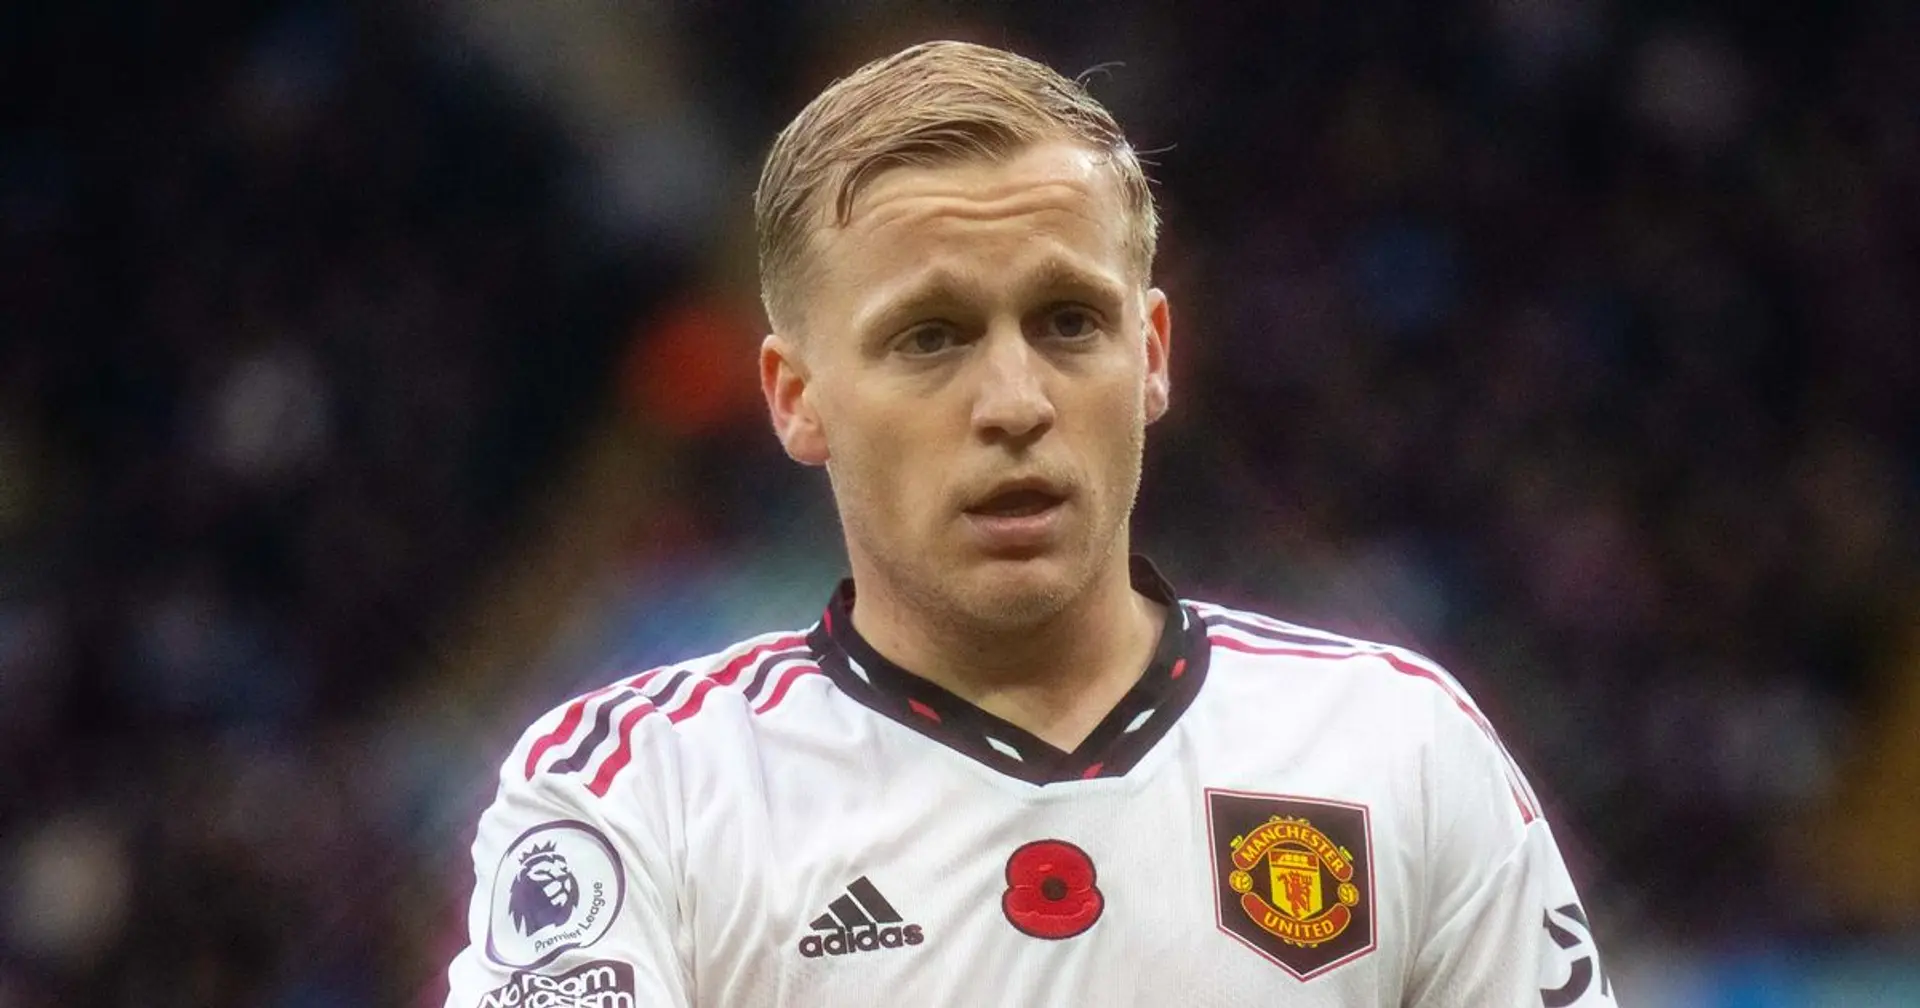 'He took about 5 years to play the ball out': BBC pundit slams Van de Beek after Aston Villa defeat